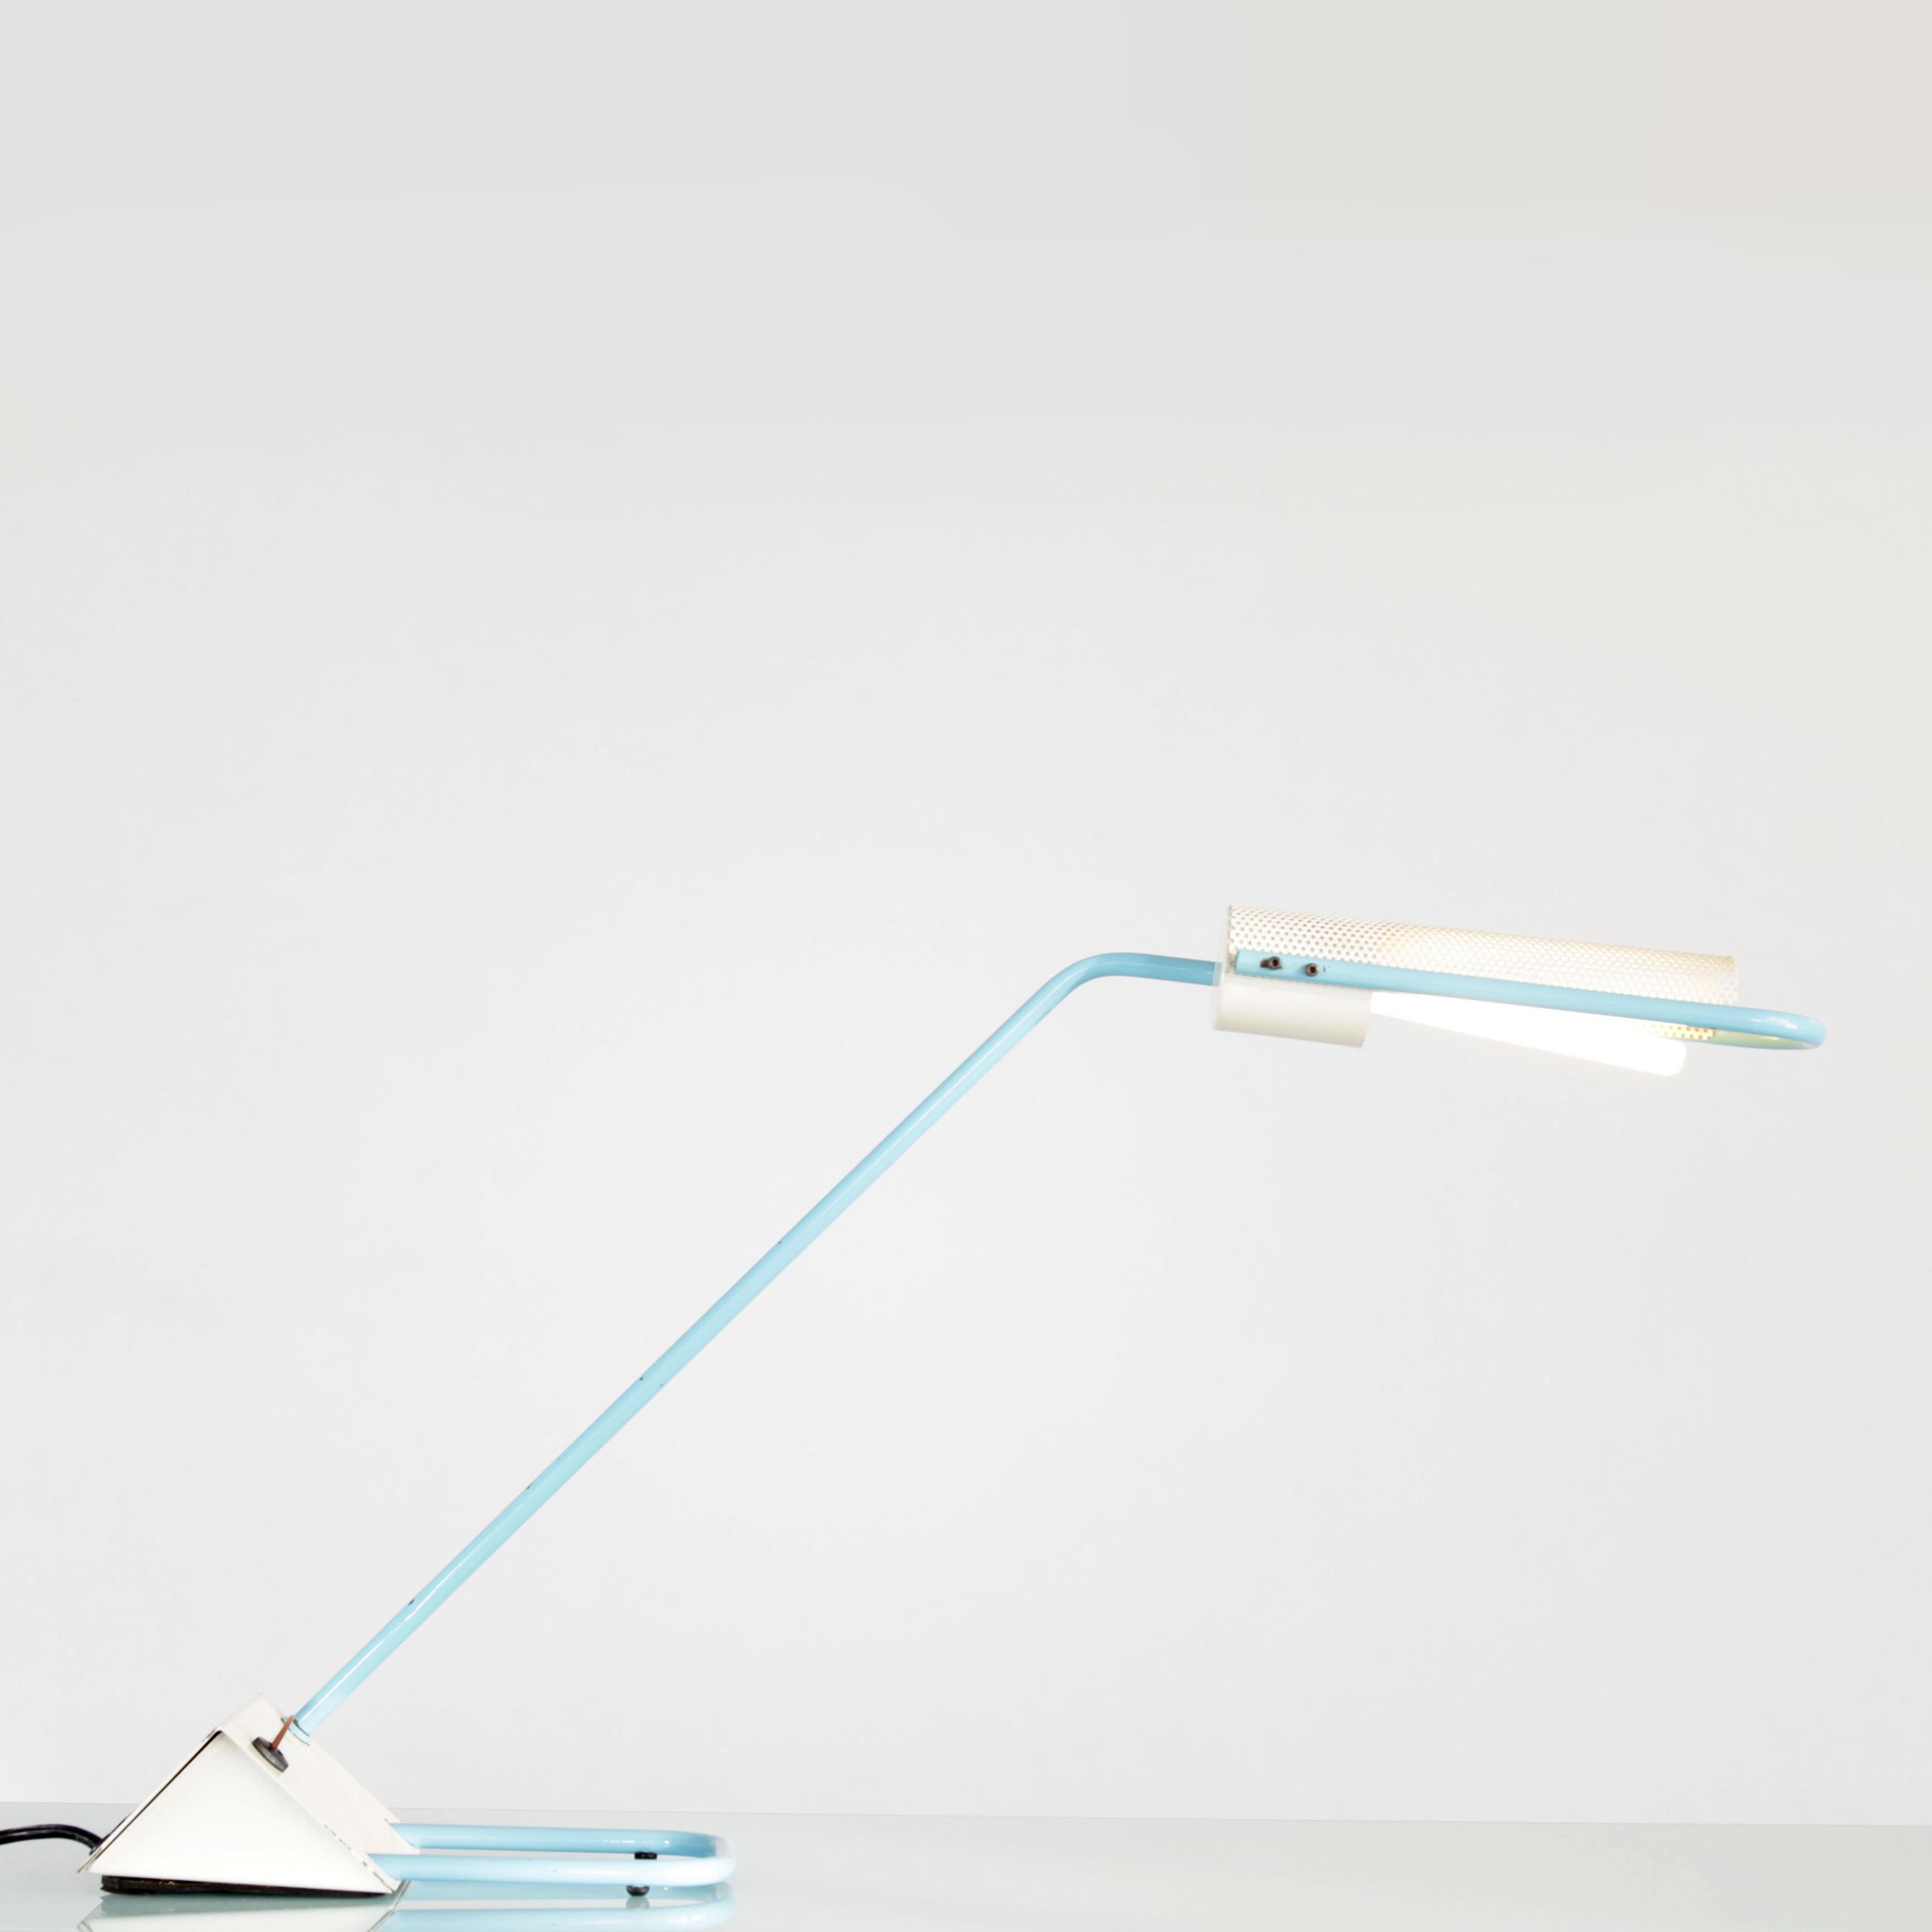 Desk lamp manufactured by Candle. The lamp has a two-tone painted metal housing, with a perforated plate in the area of the bulb.

Feel free to contact us for more detailed pictures.